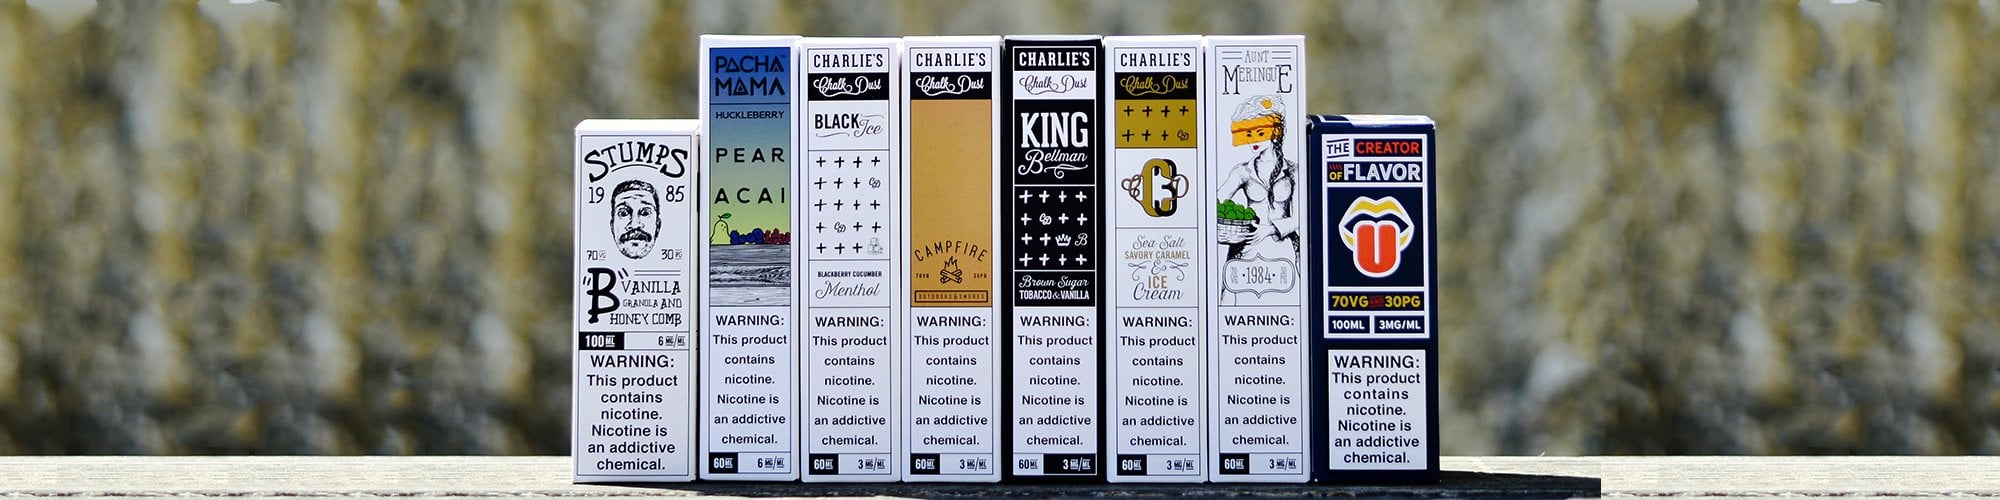 Charlies Chalk Dust Ejuice Review Main Banner